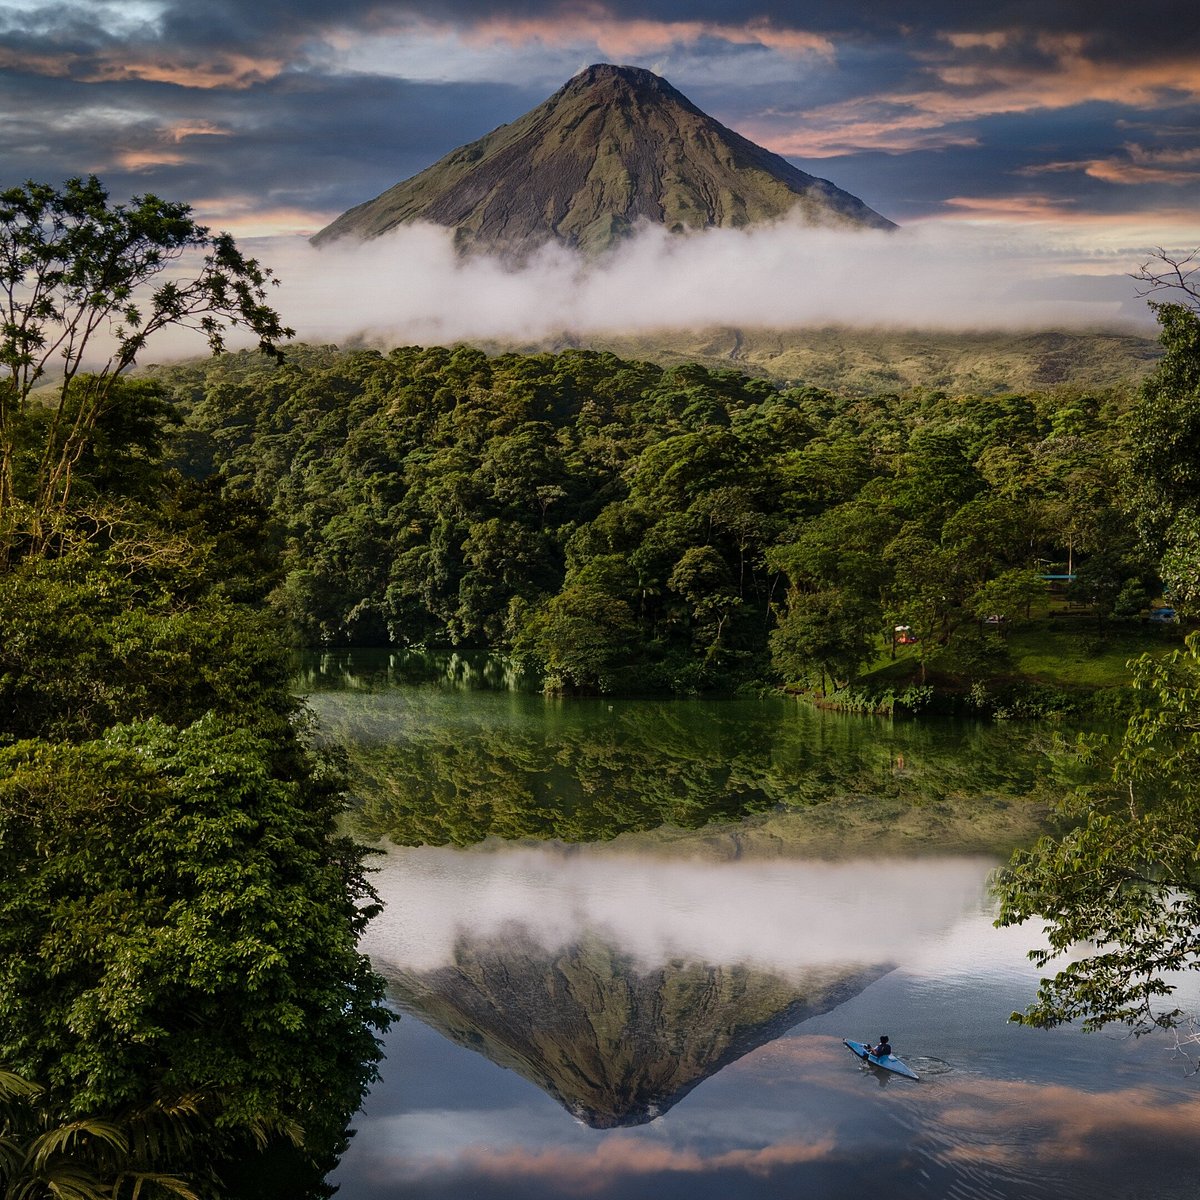 Parque Ecologico Volcan Arenal (La Fortuna de San Carlos) - All You Need to  Know BEFORE You Go